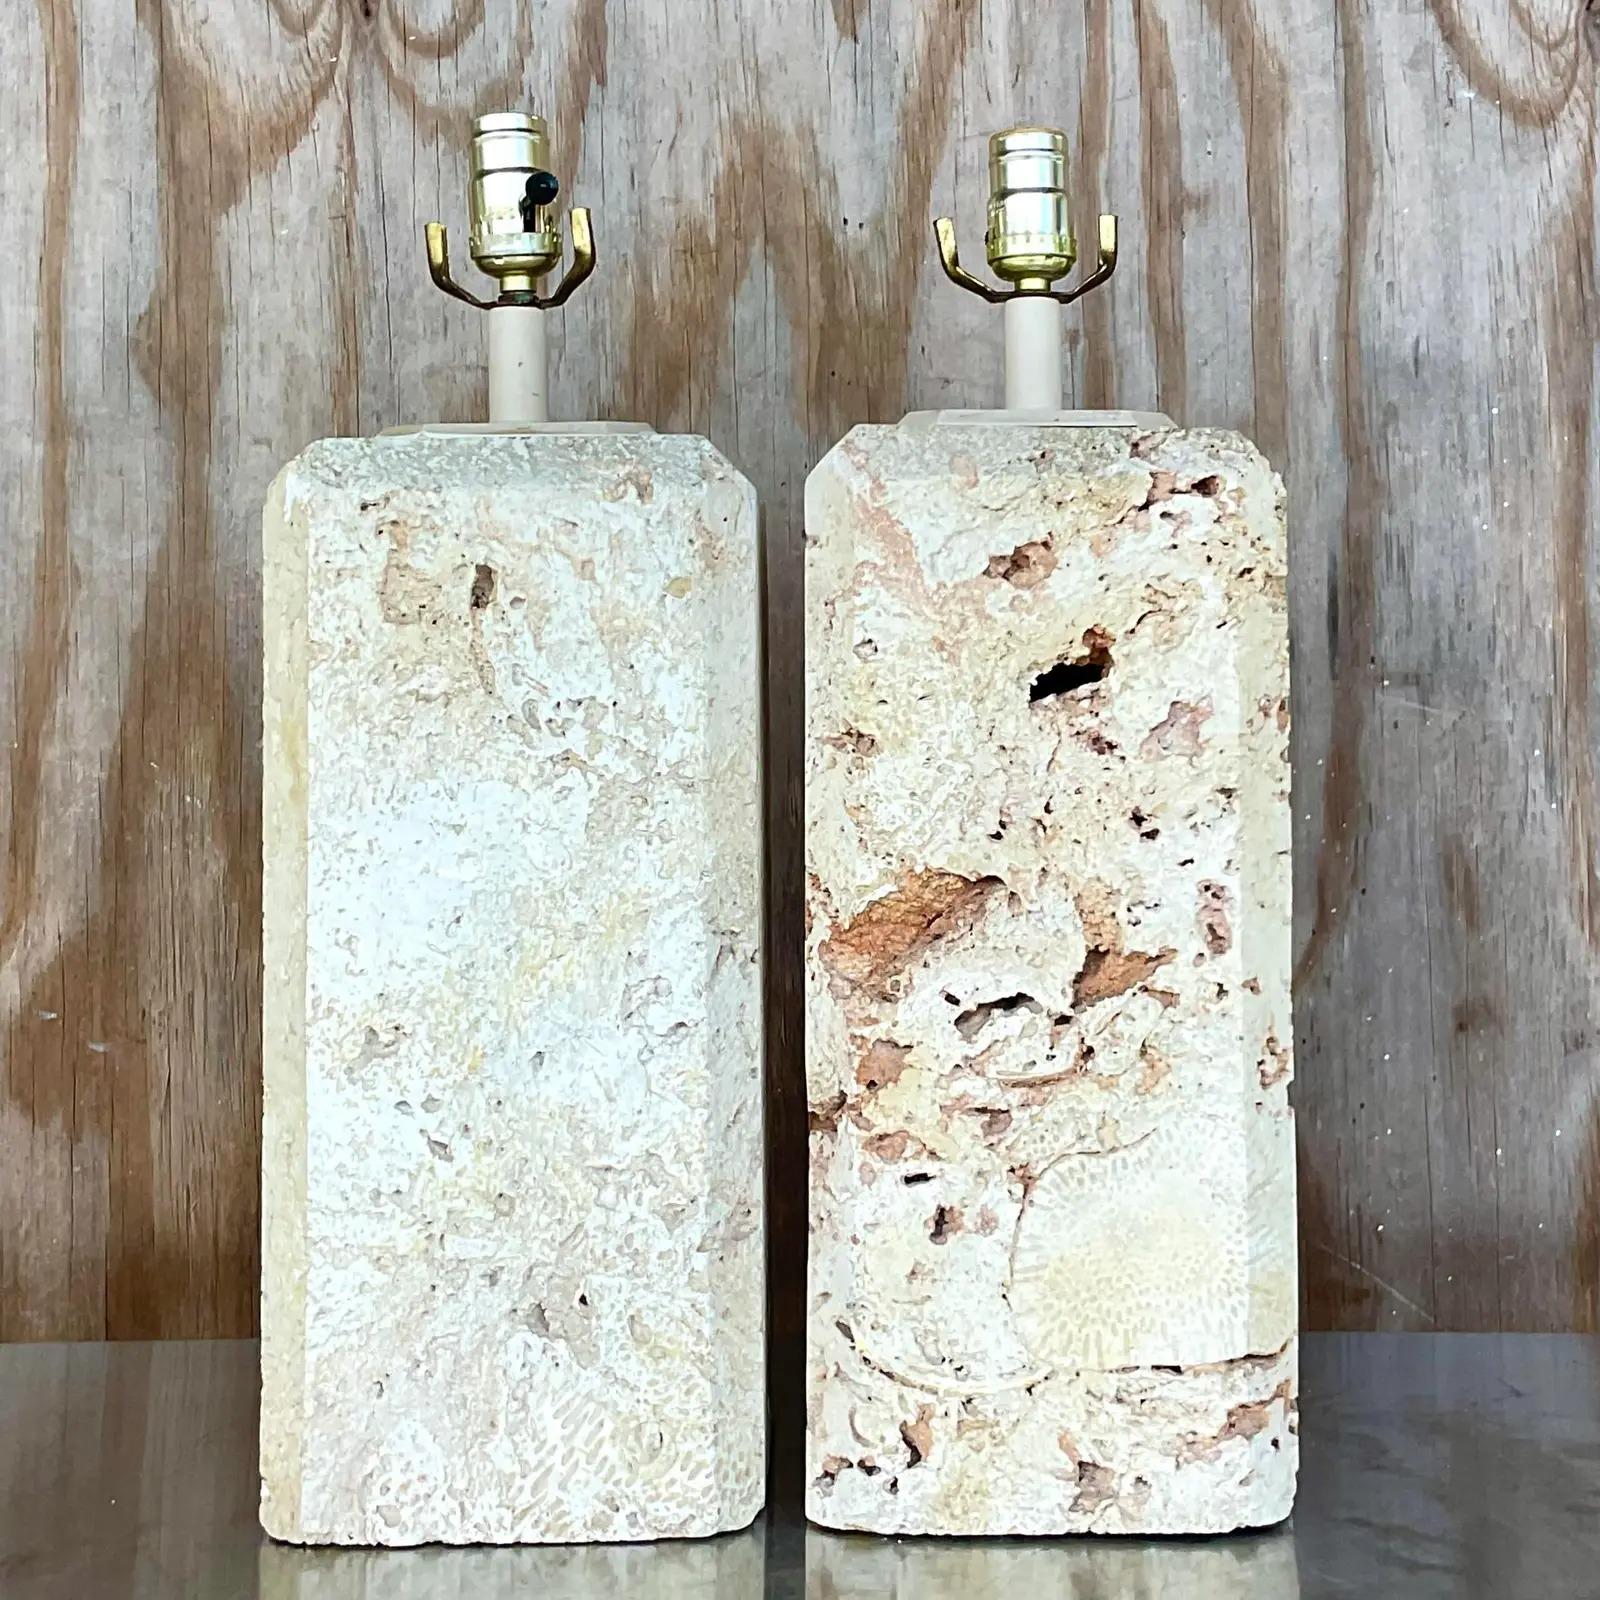 Spectacular pair of vintage Coquina stone lamps. A solid block of stone with brass hardware. Large and impressive. Acquired from a Palm Beach estate.